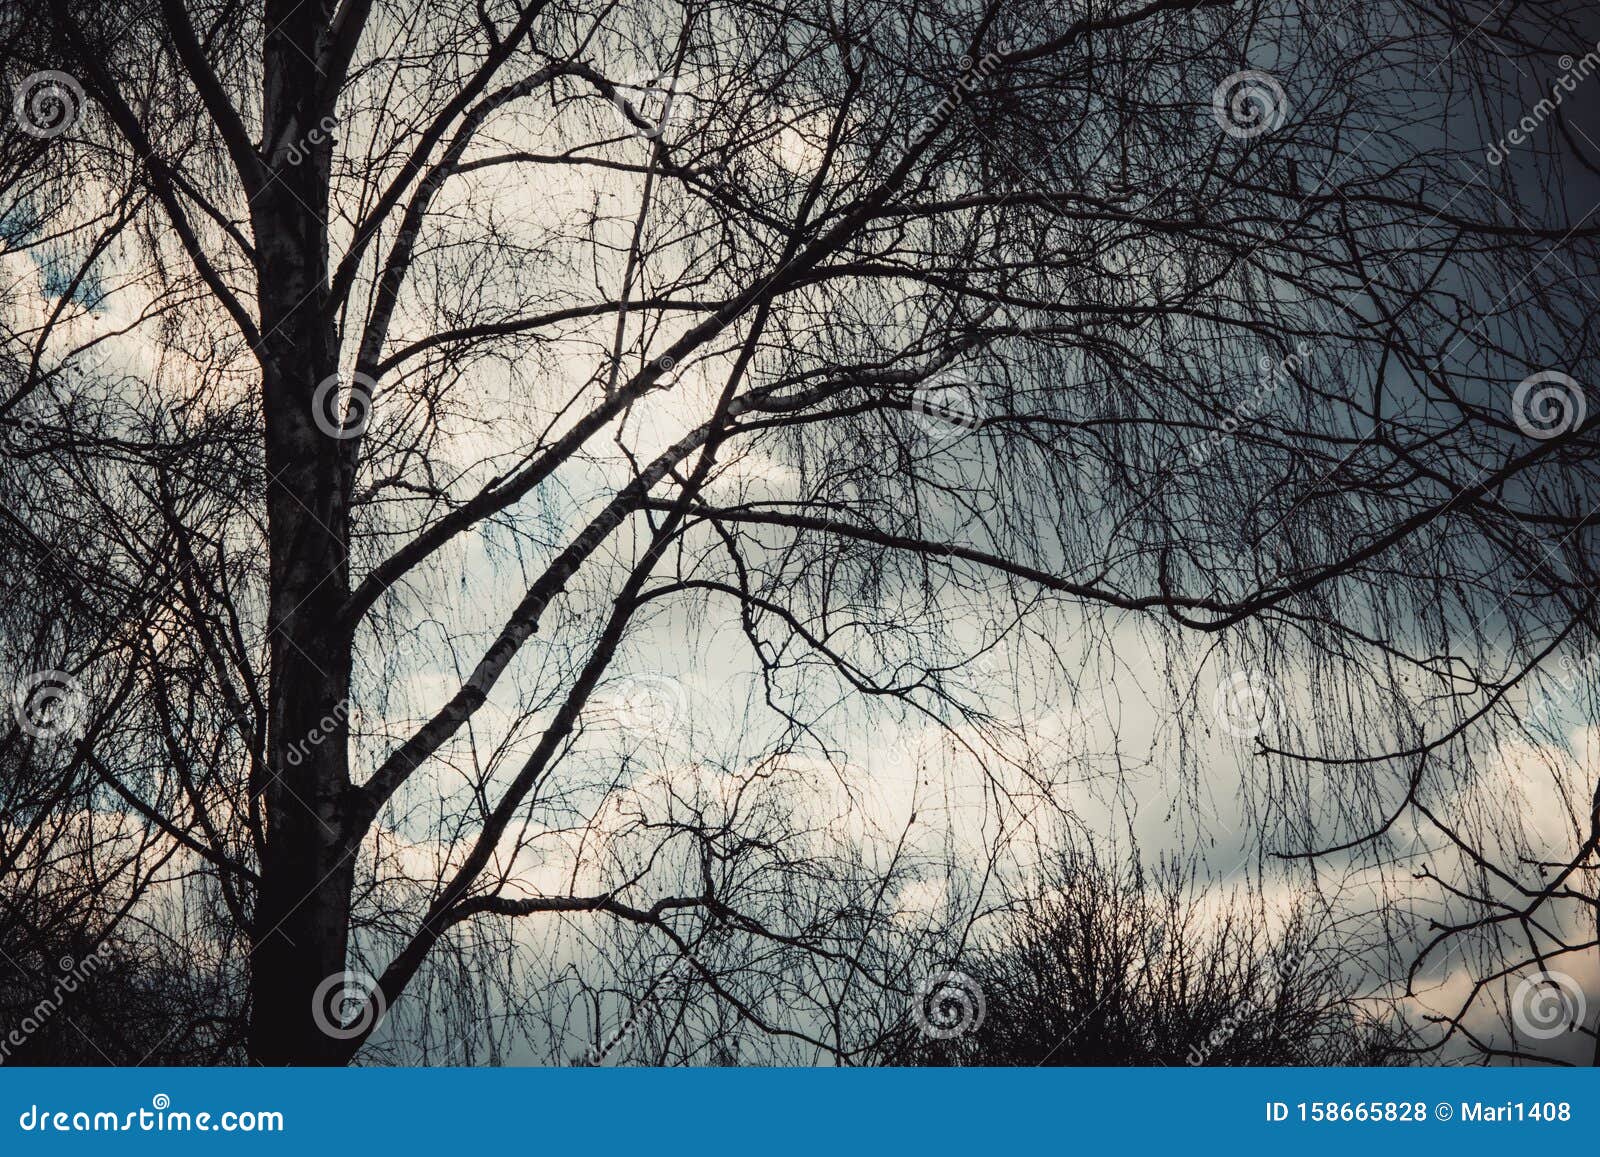 Tree Branches Against a Cloudy Rainy Sky Background Stock Photo - Image